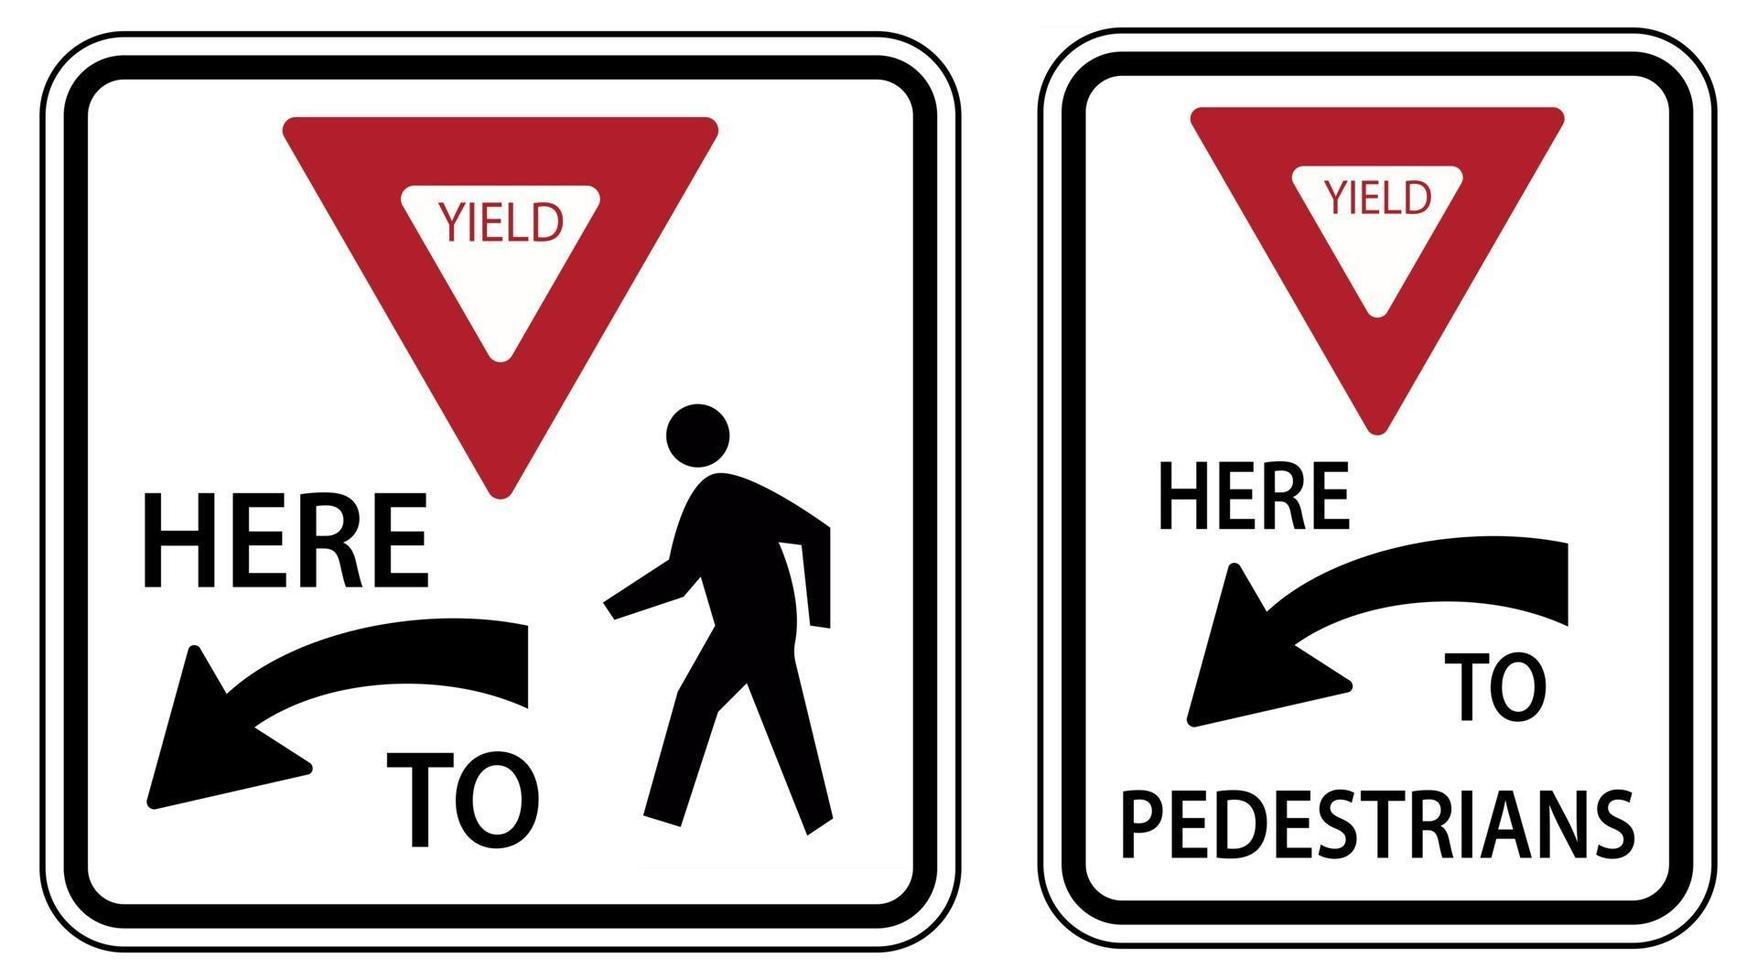 Traffic Road Sign Yield Here To Pedestrians Alternative Warning vector